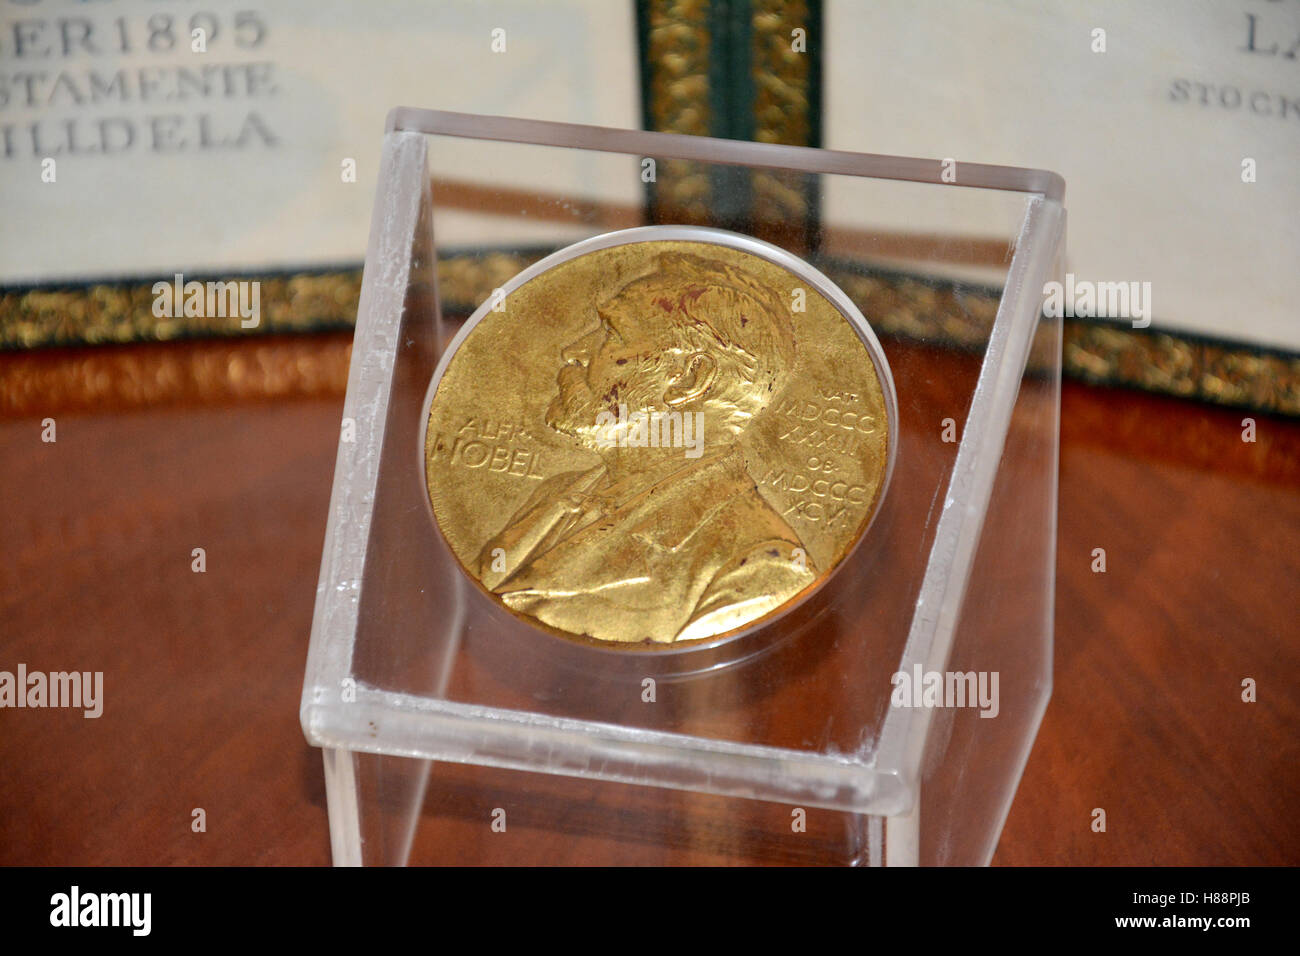 Belgrade, Serbia. October 7th 2016 - Alfred Nobel on the Nobel Prize medal from 1961 year Stock Photo